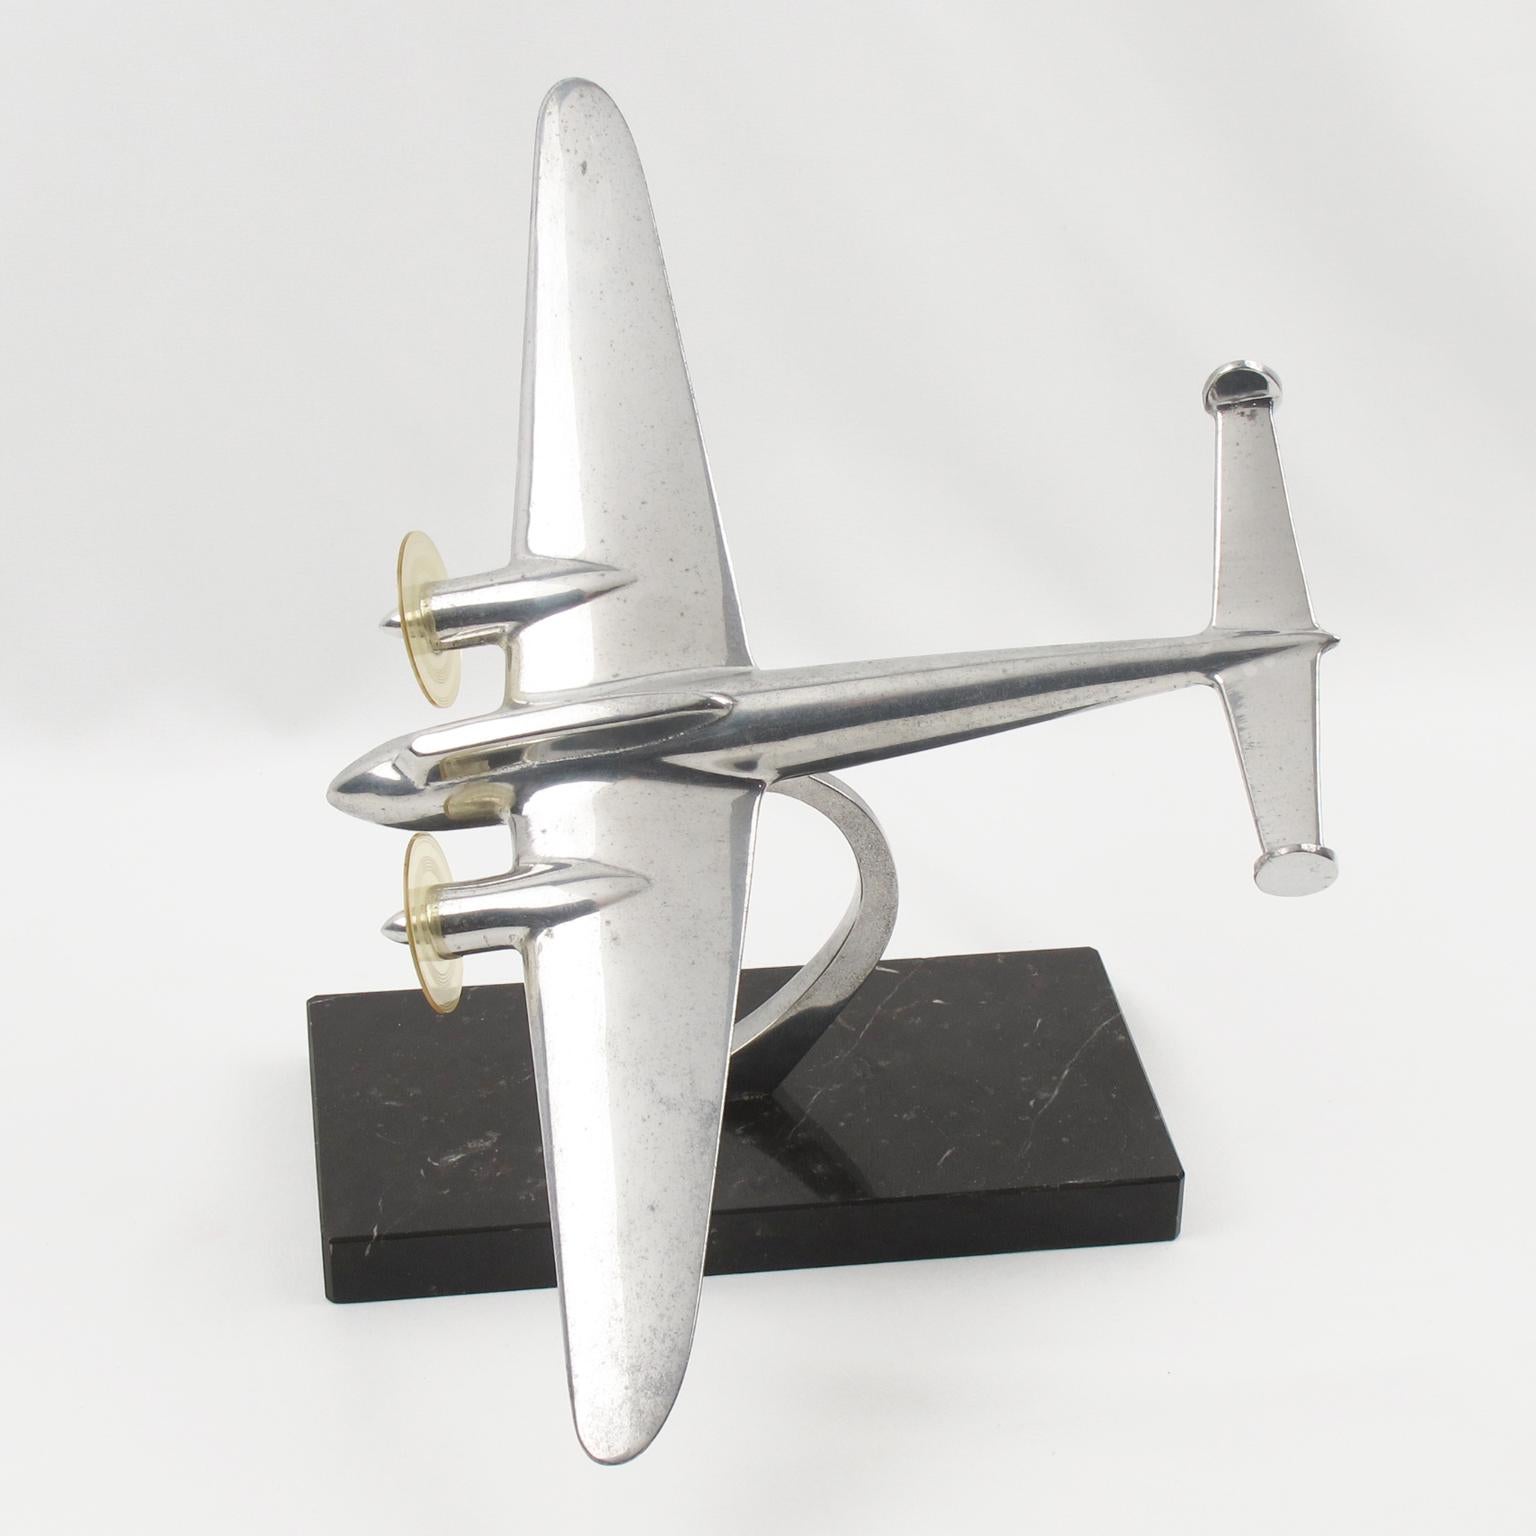 Cast French Aviation Aluminum and Marble Airplane Model